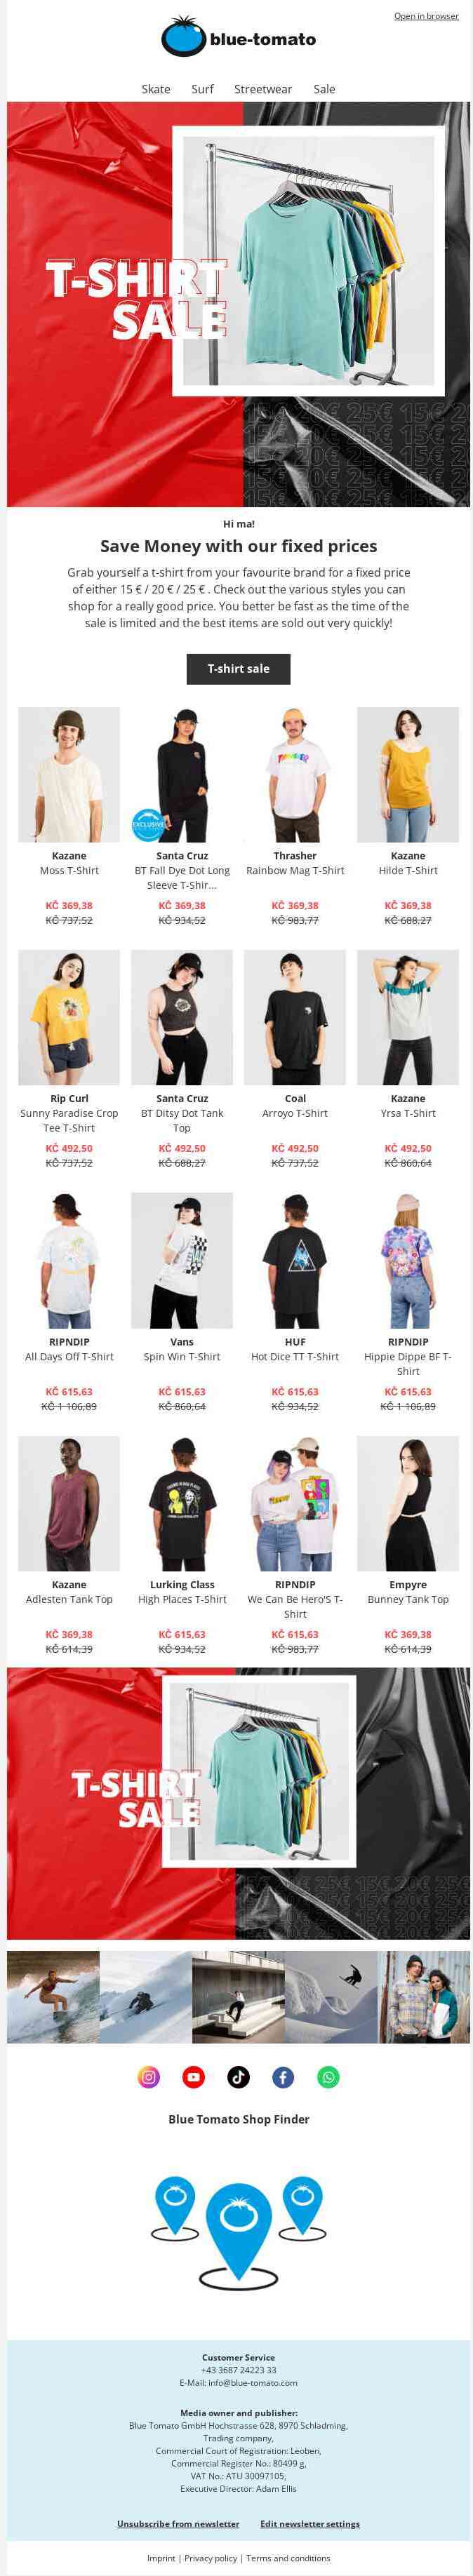 Better be quick: t-shirt sale with fixed prices